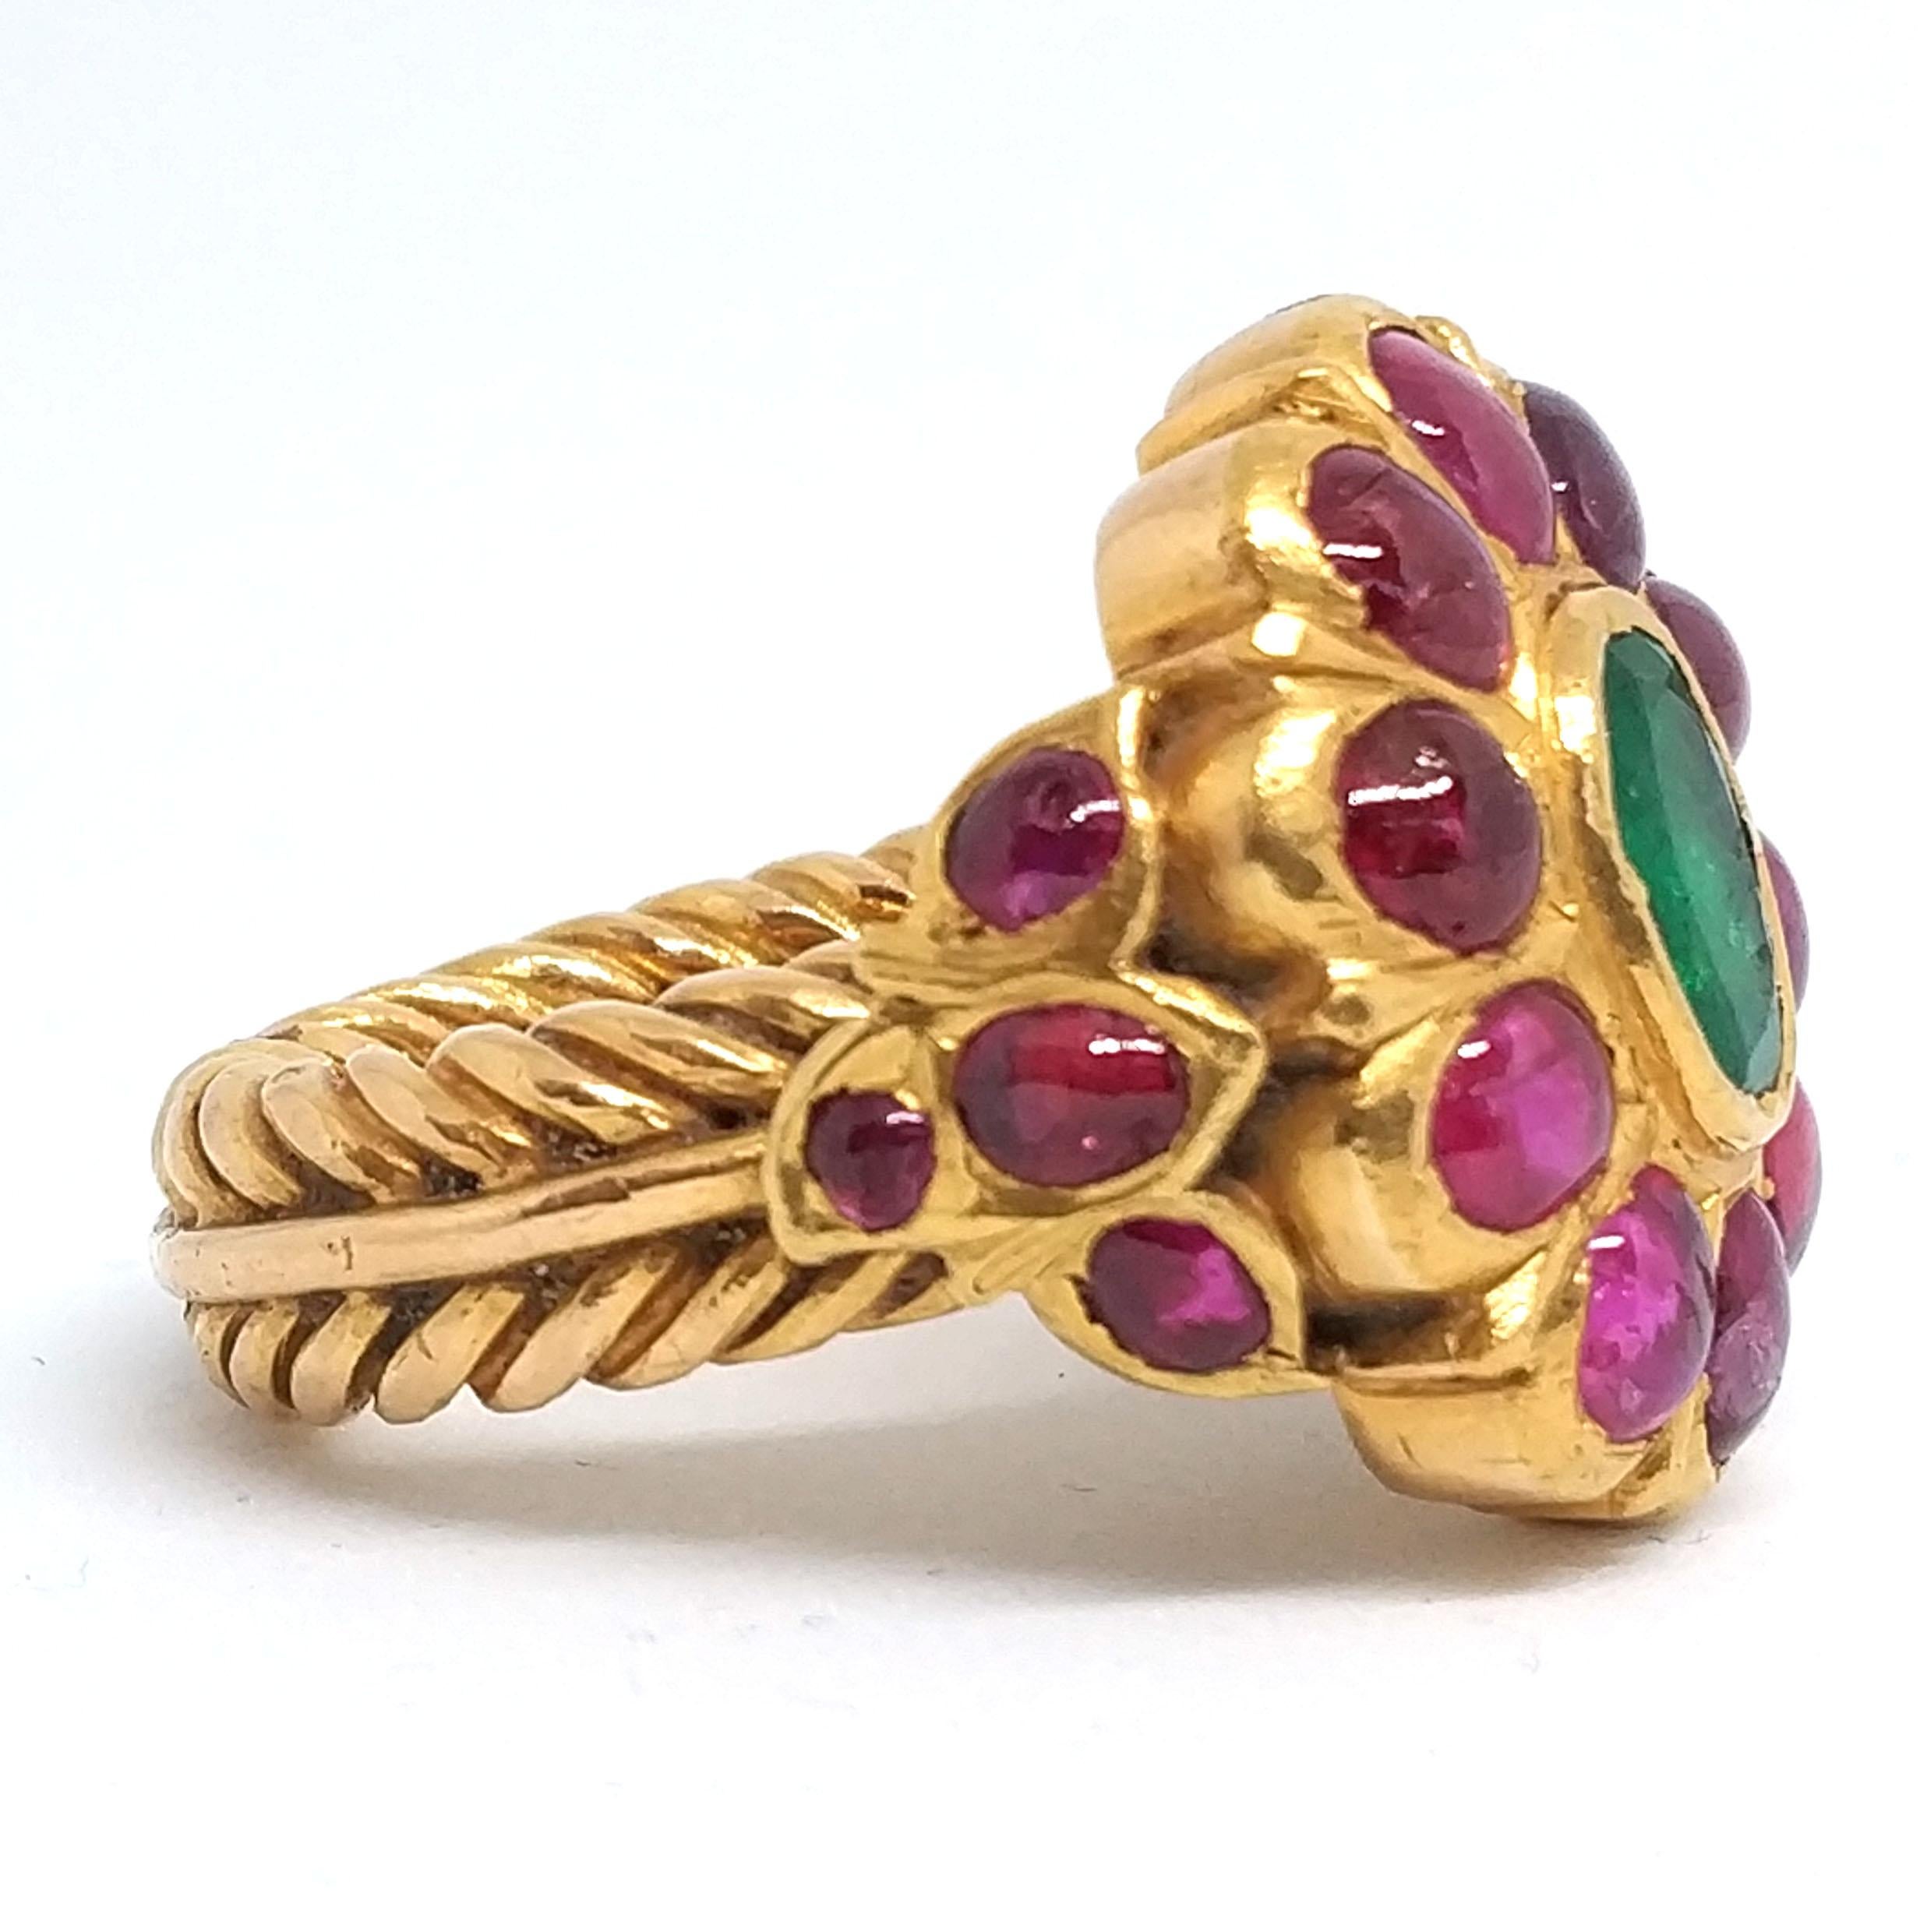 Antique Royal 5.5 carat Ruby and 3 carat Emerald Ring in 23 Carat Gold For Sale 4